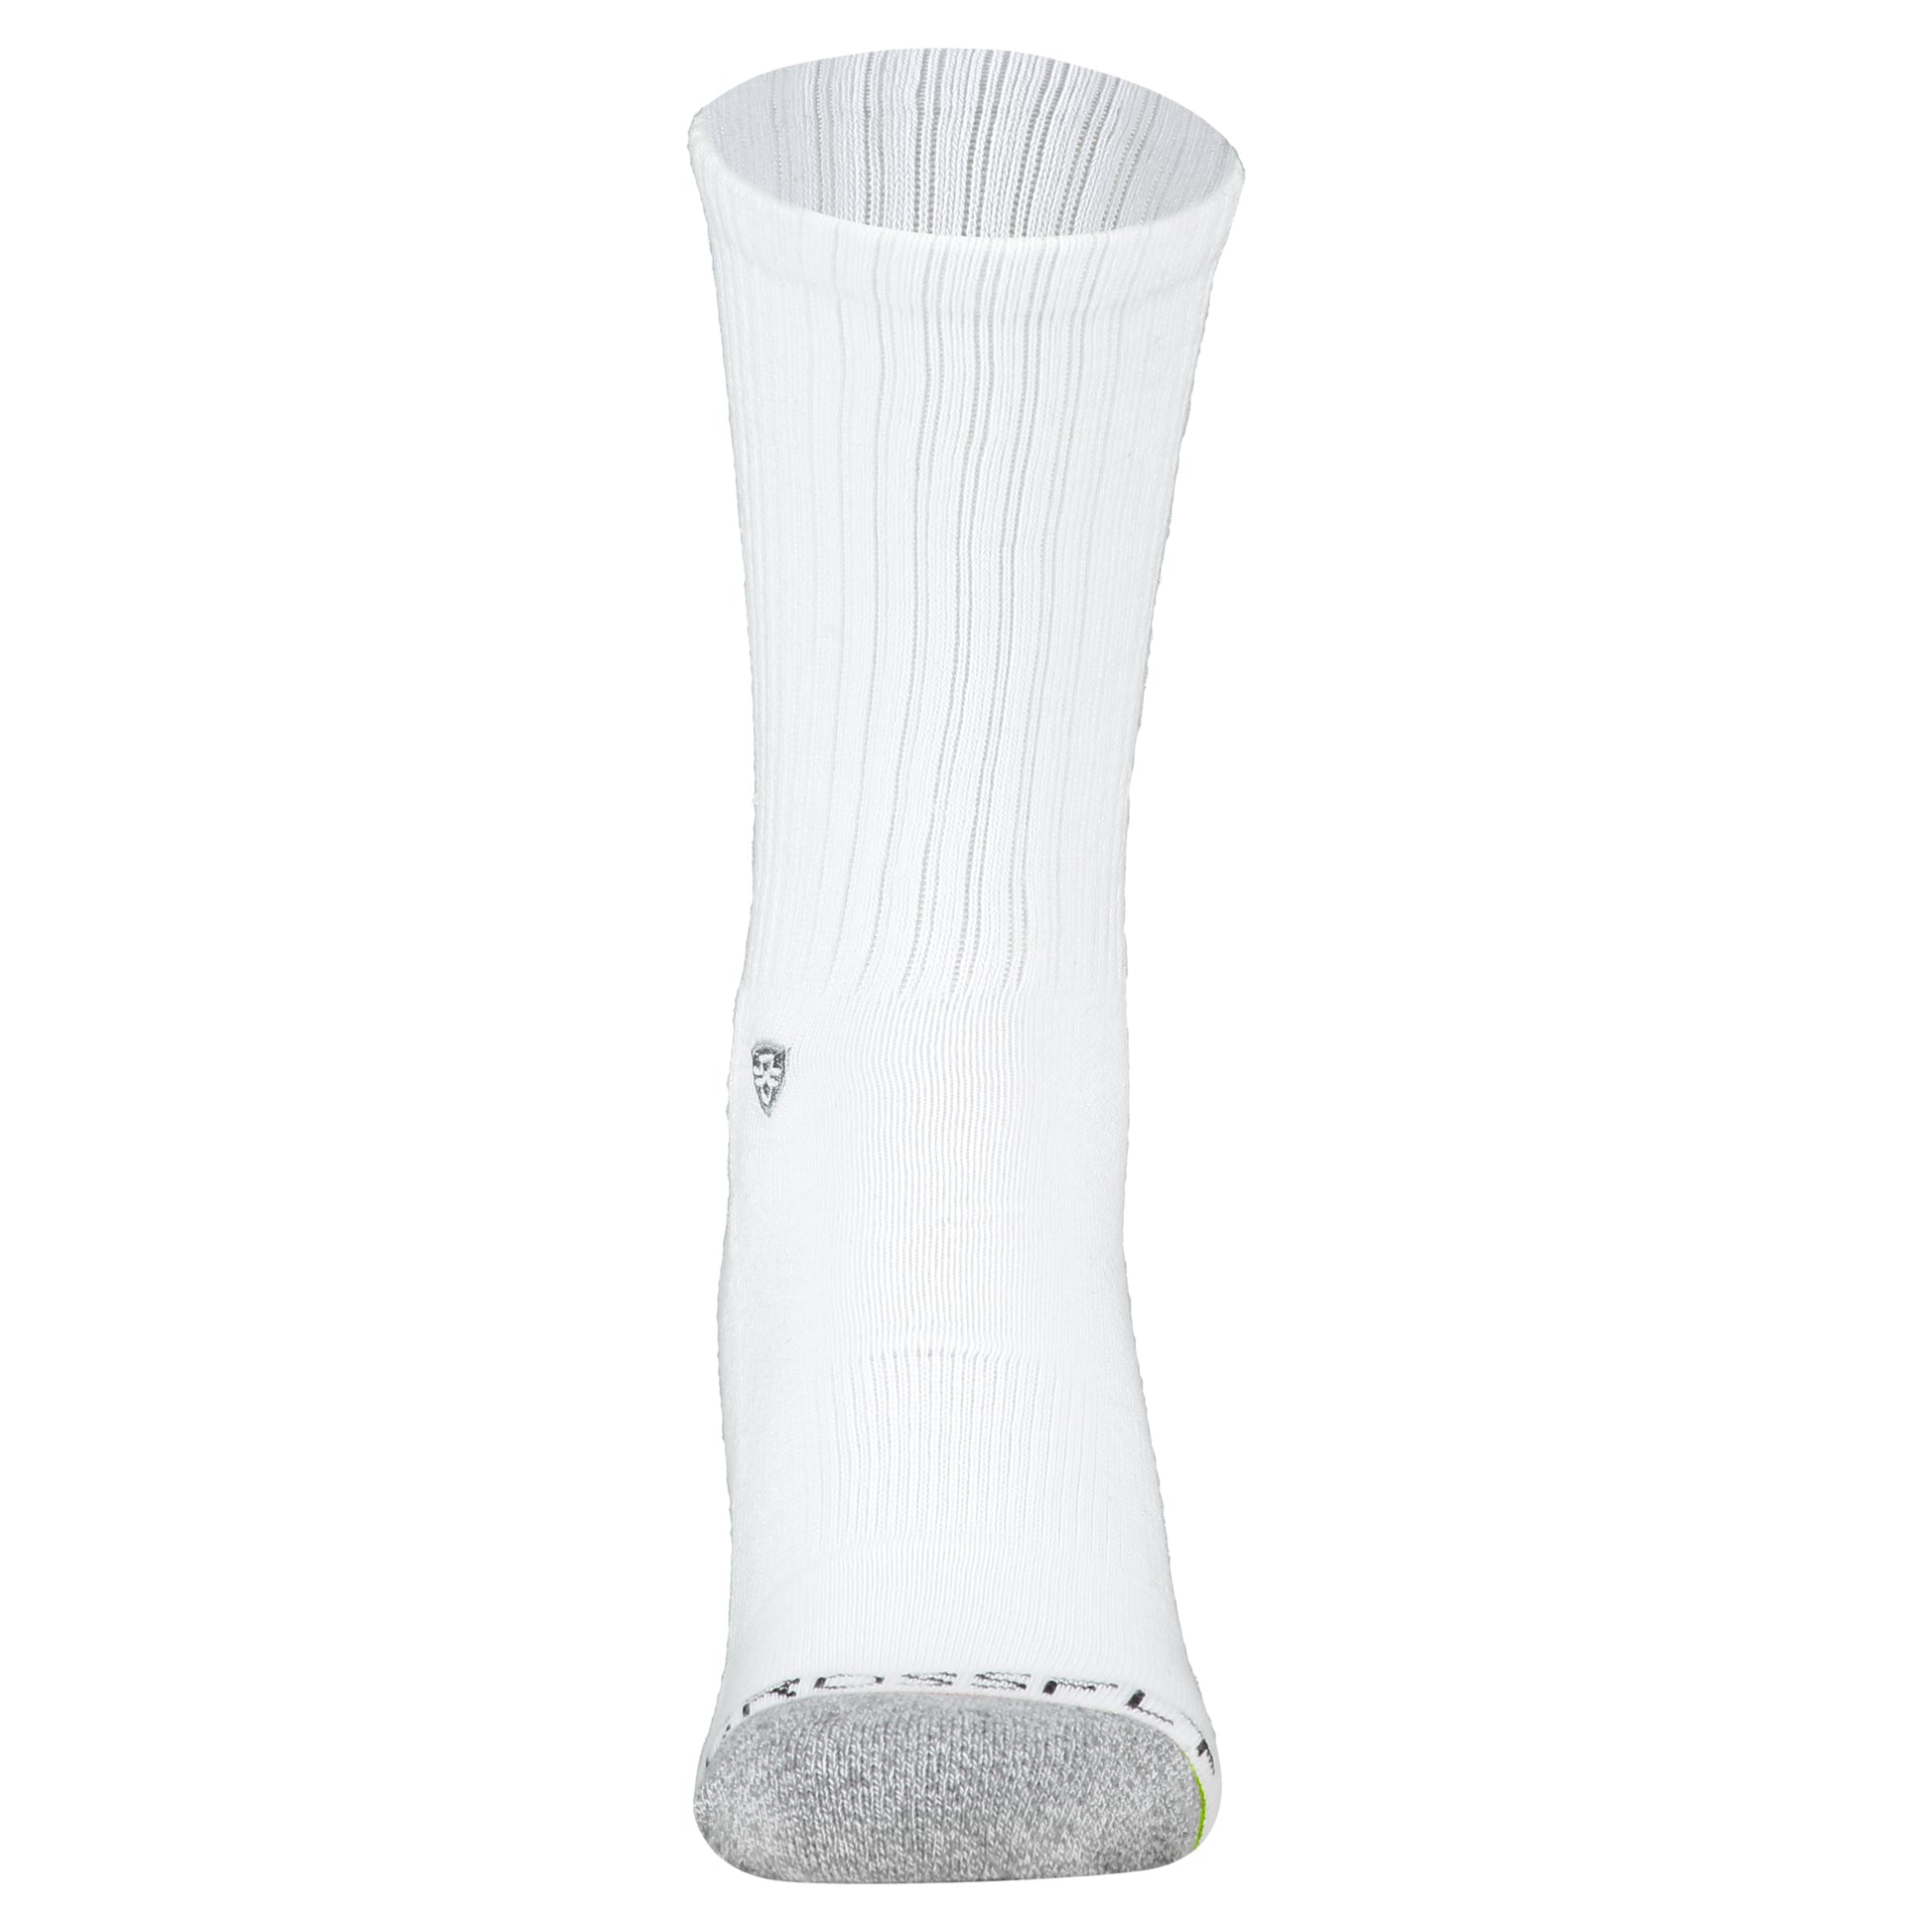 Crossfly men's Original Crew Socks in white from the Everyday series, featuring Flat Toe Seams and 360 Hold.